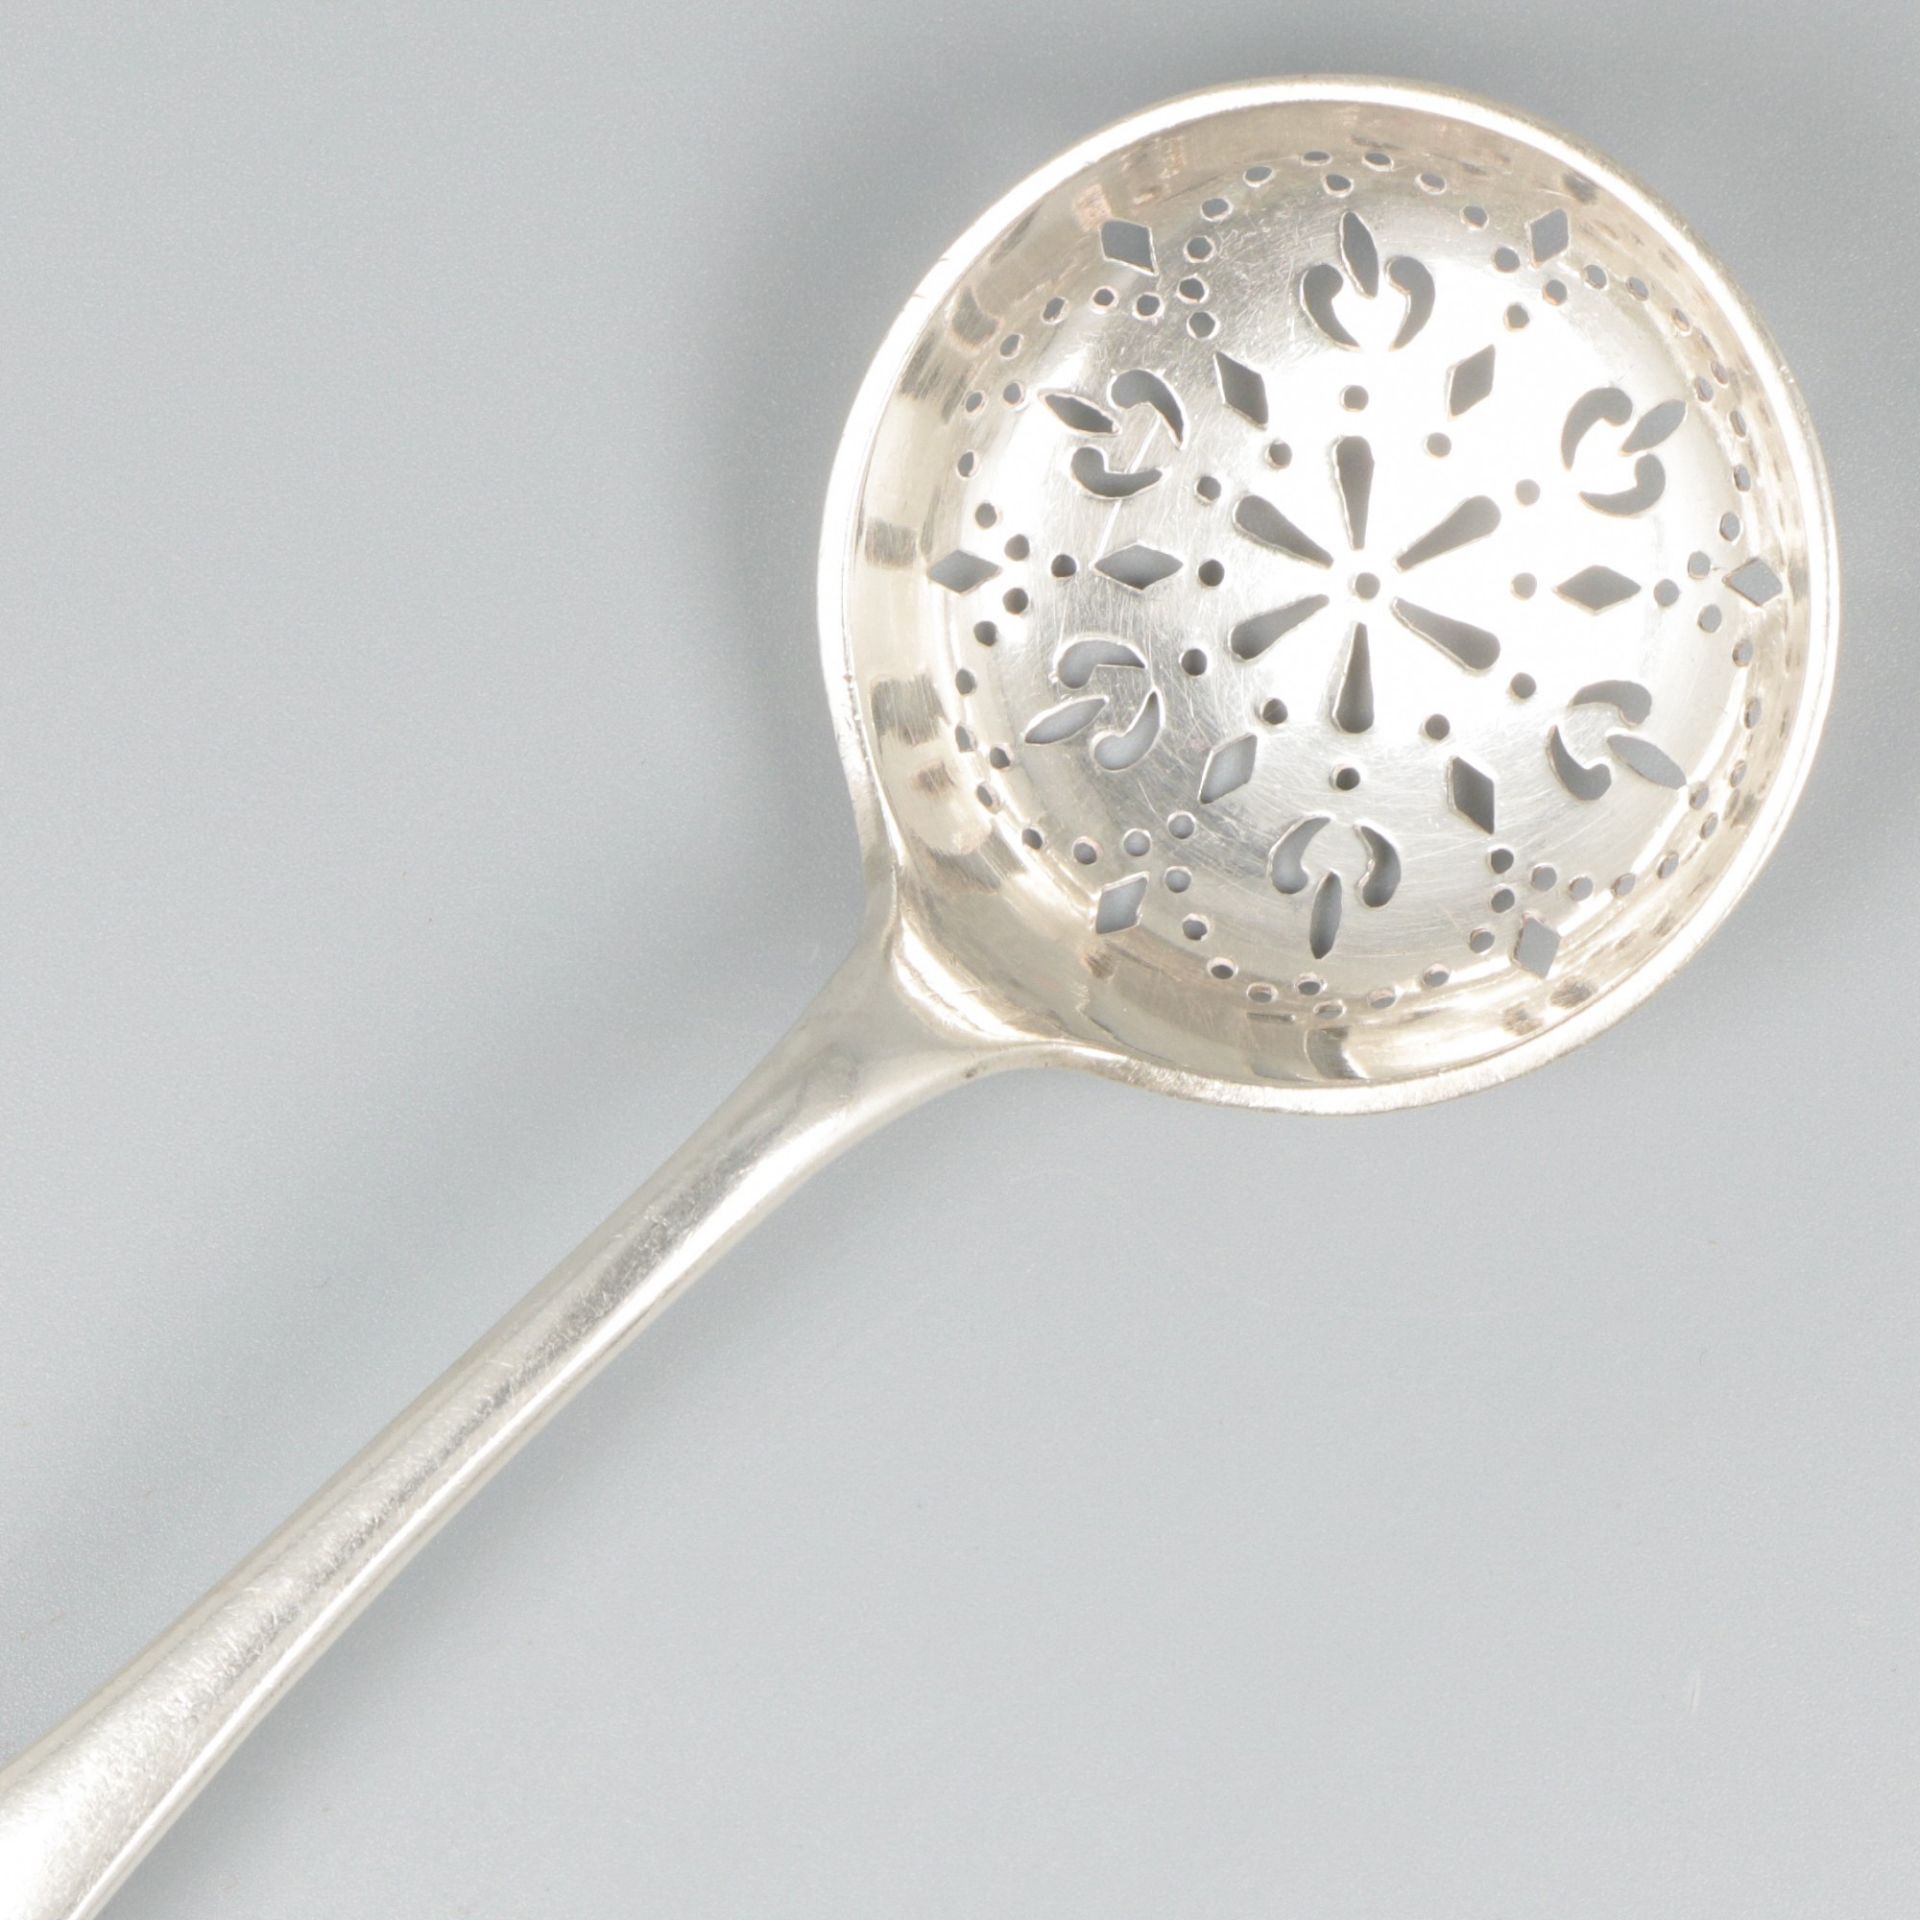 Sifter spoon silver. - Image 3 of 5